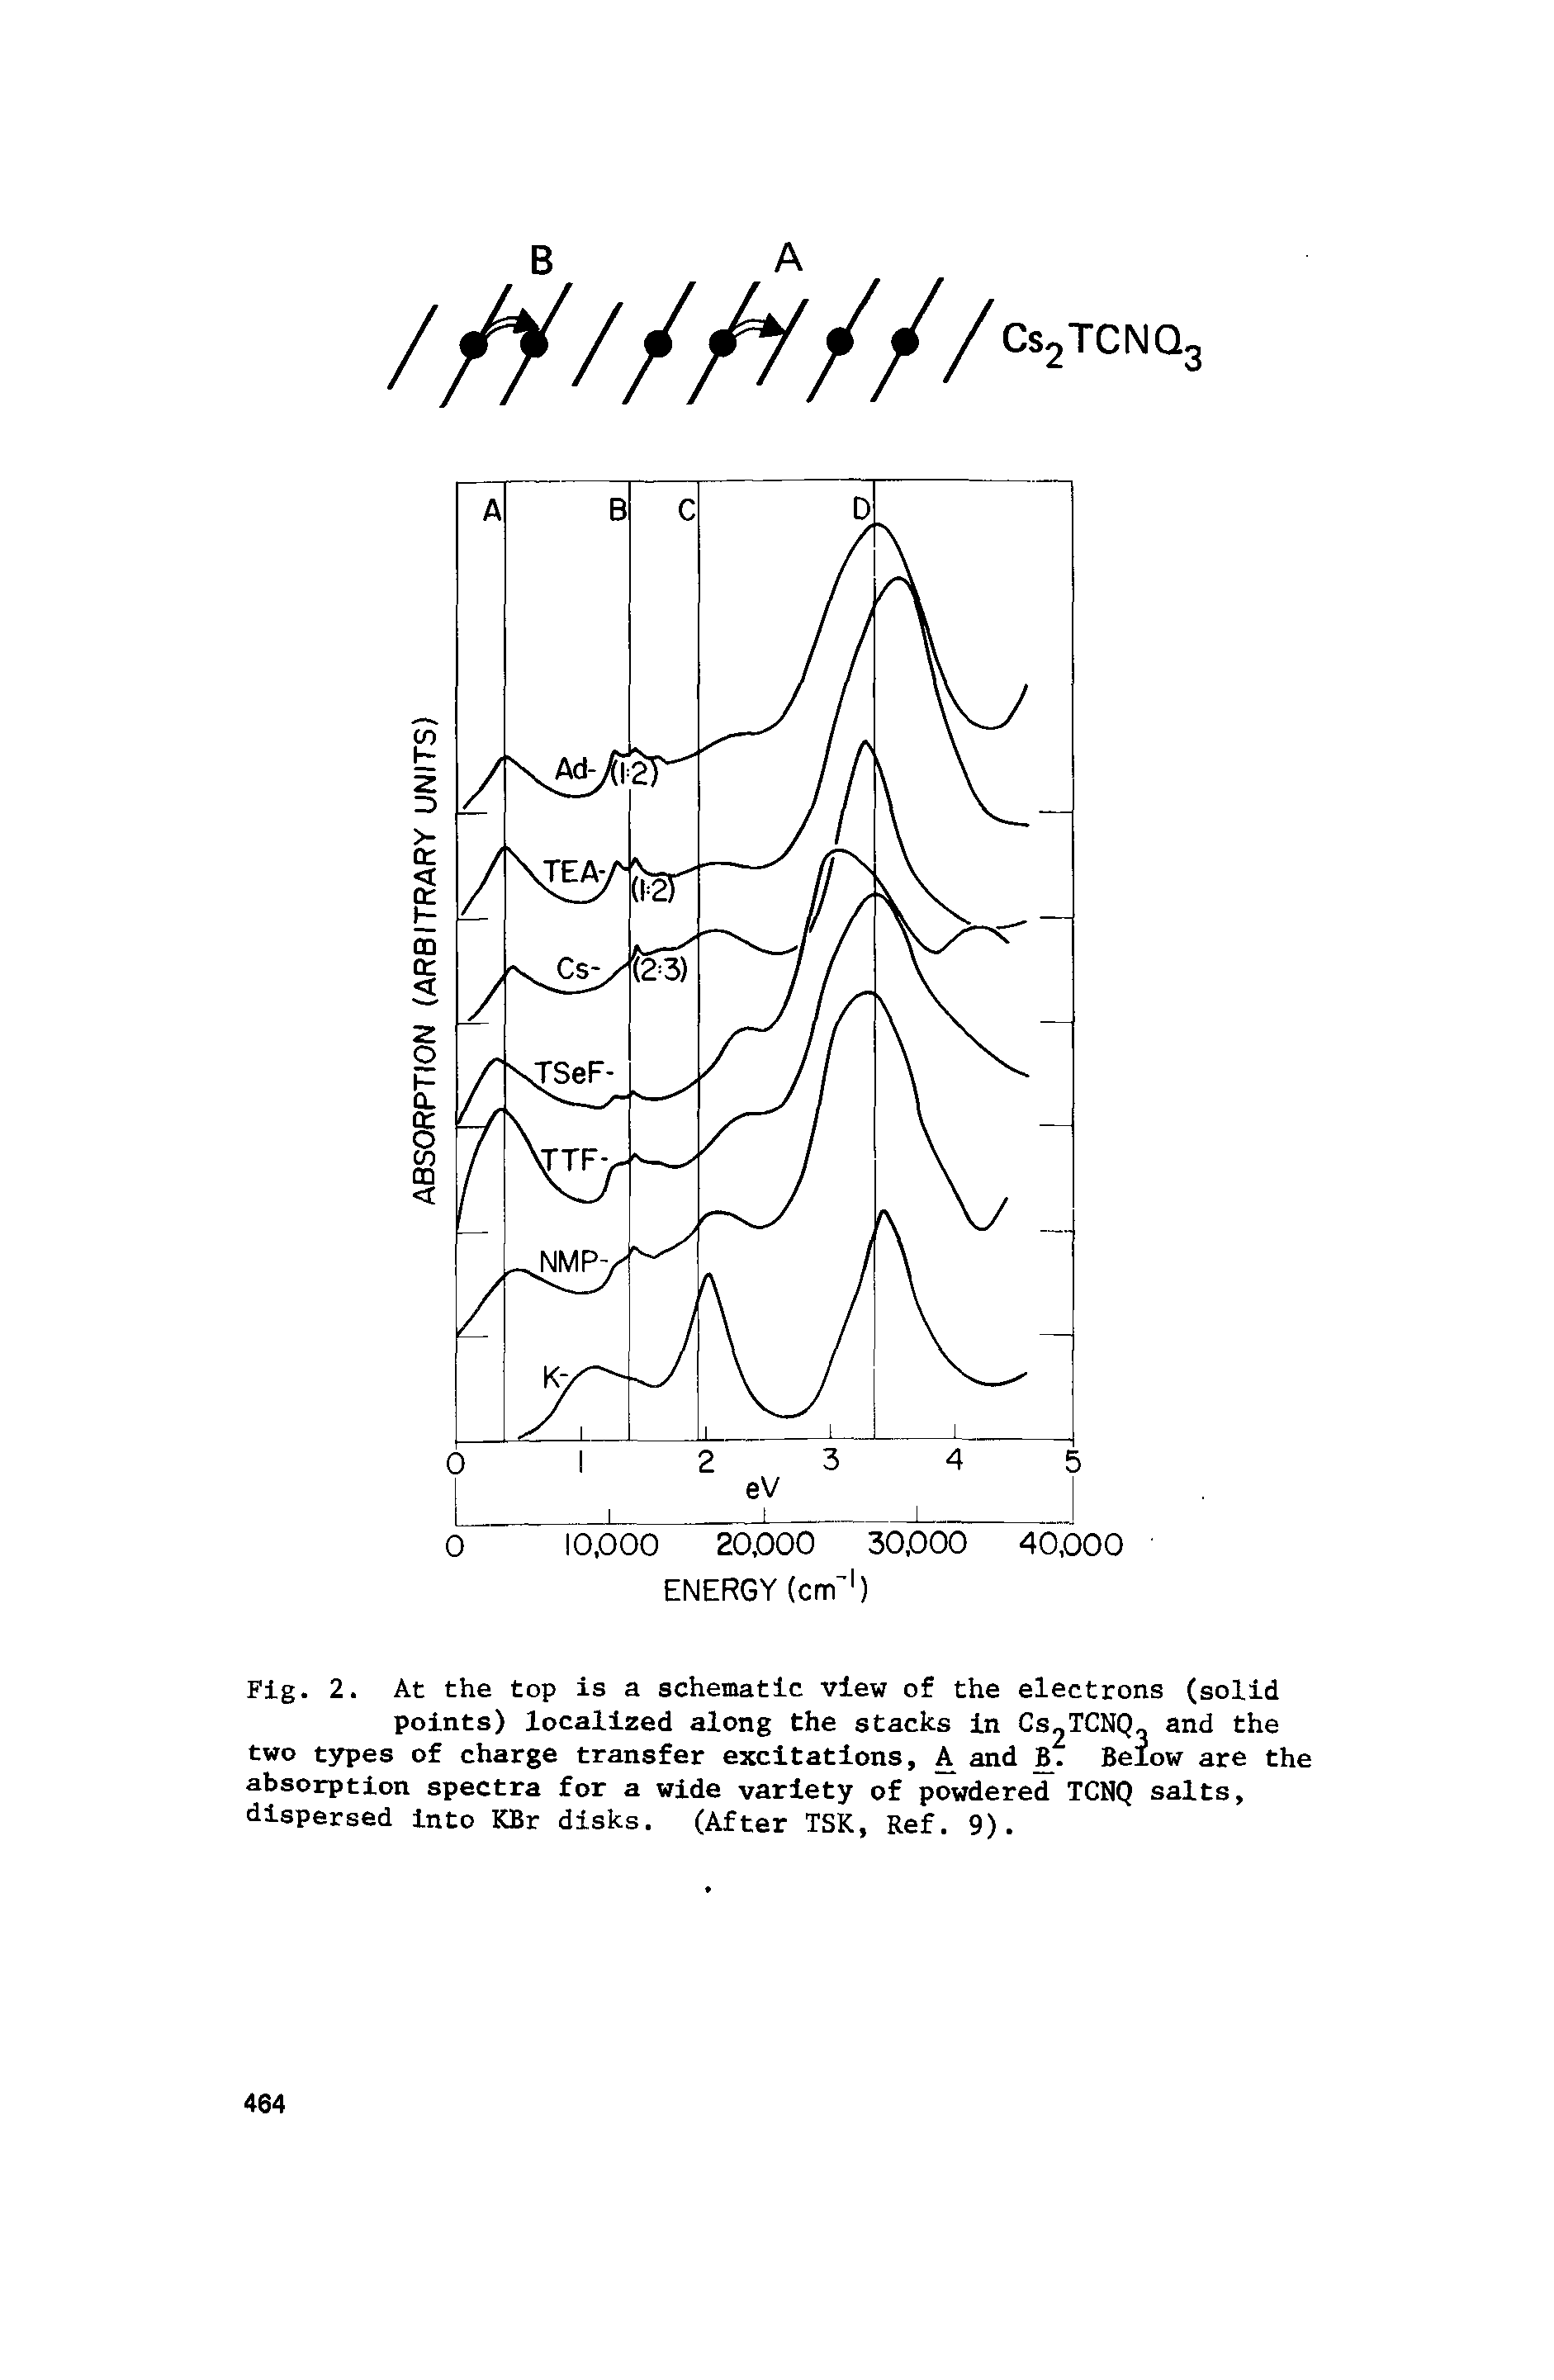 Fig. 2. At the top is a schematic view of the electrons (solid points) localized along the stacks in Cs2TCNQ and the two types of charge transfer excitations, A and 15. Below are the absorption spectra for a wide variety of powdered TCNQ salts, dispersed into KBr disks. (After TSK, Ref. 9).